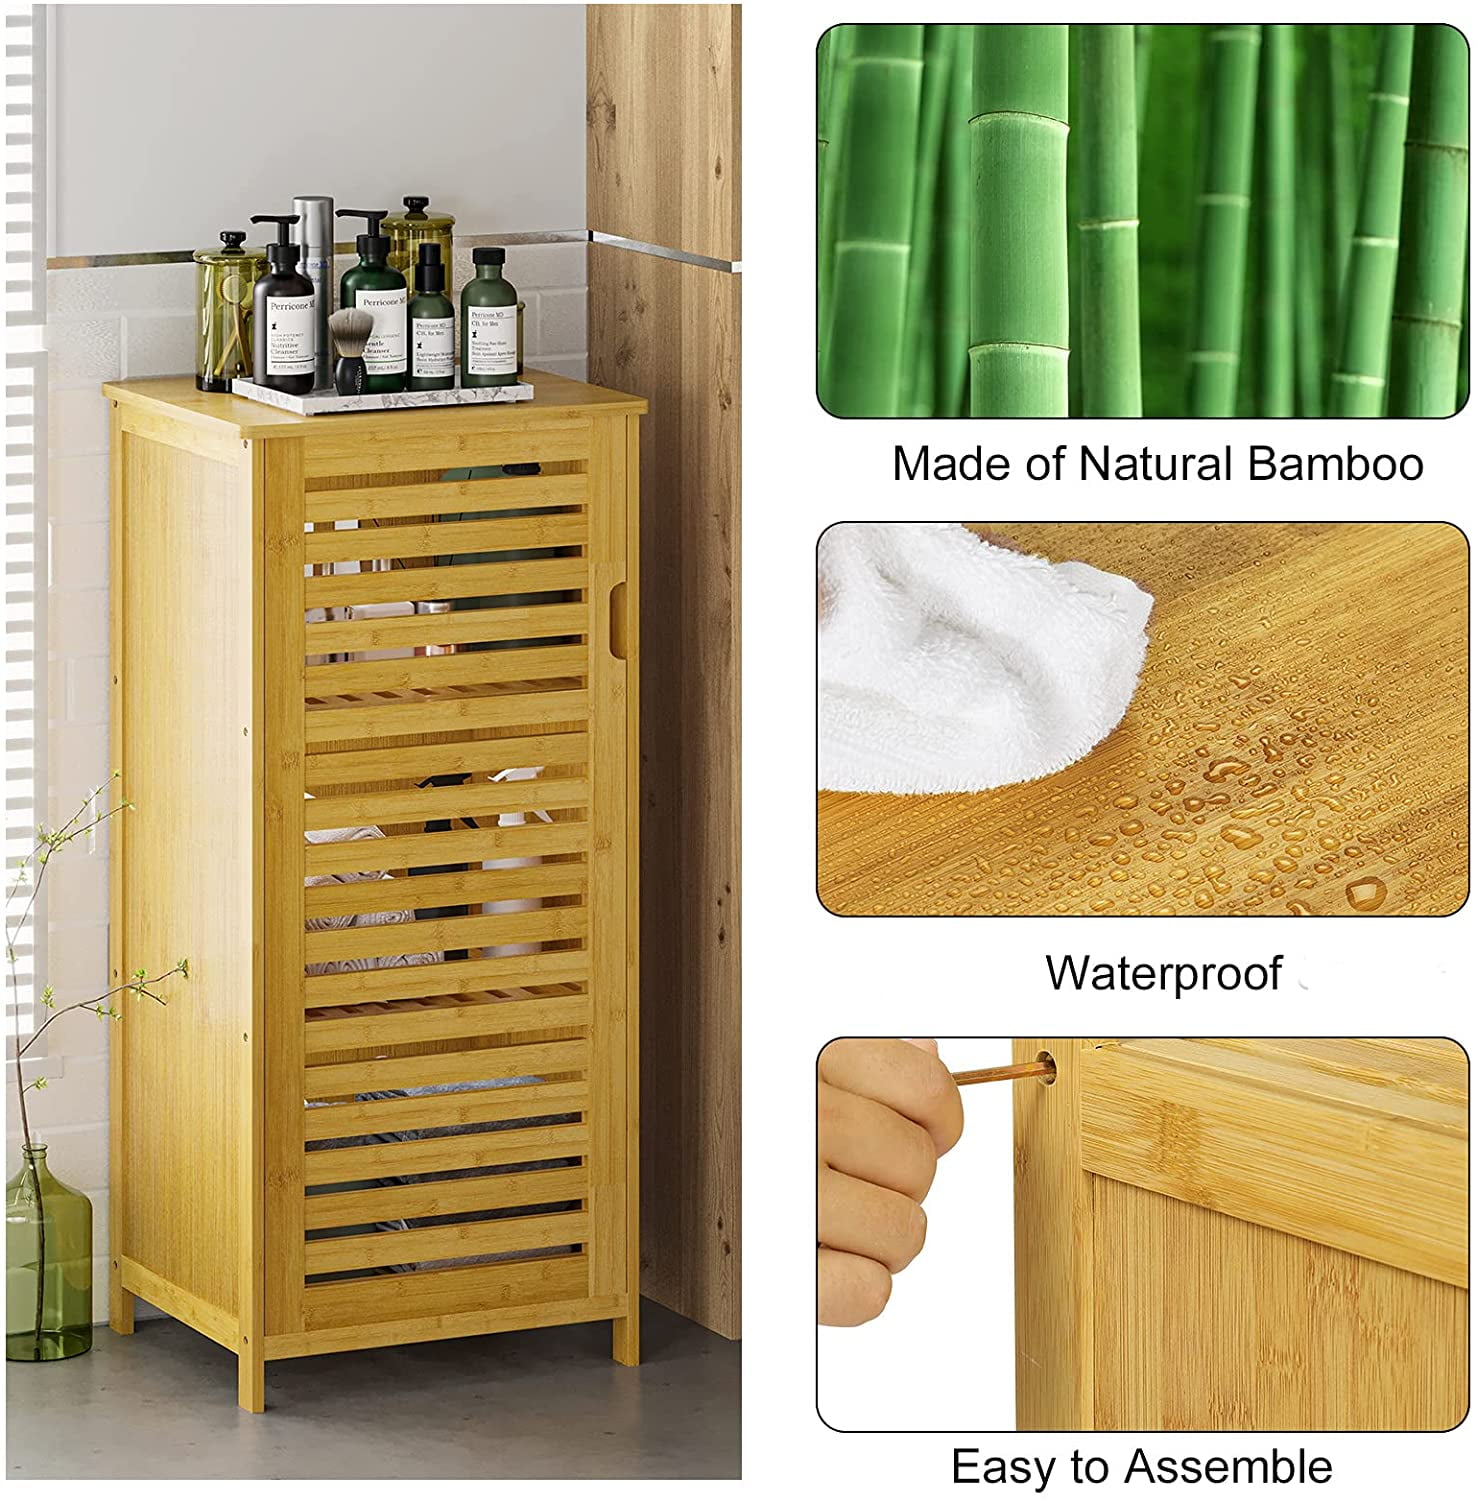 VIAGDO Over The Toilet Storage Shelf, Bamboo 4-Tier Bathroom Space Saver  Organizer Rack with Toilet Paper Holder, Freestanding Above Toilet Stand  with